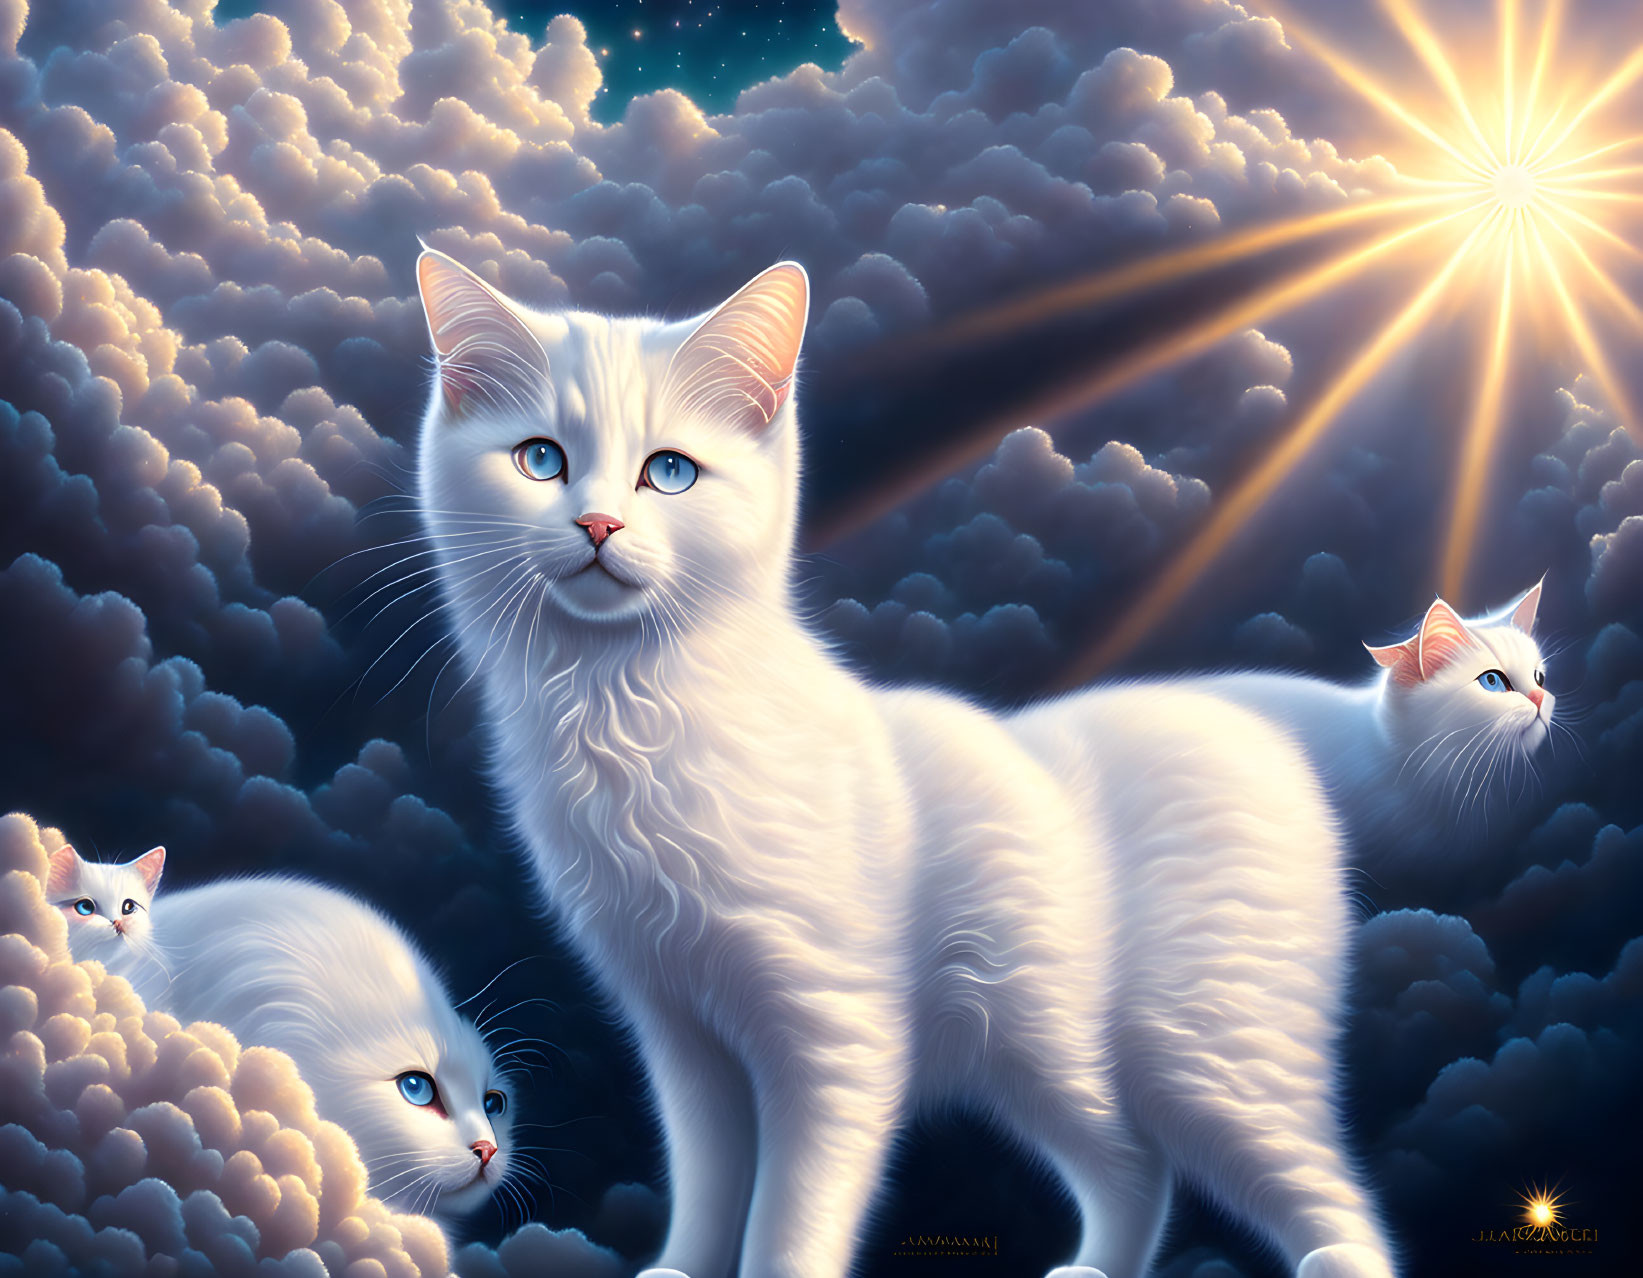 Many small white hairlong cats in the clouds again